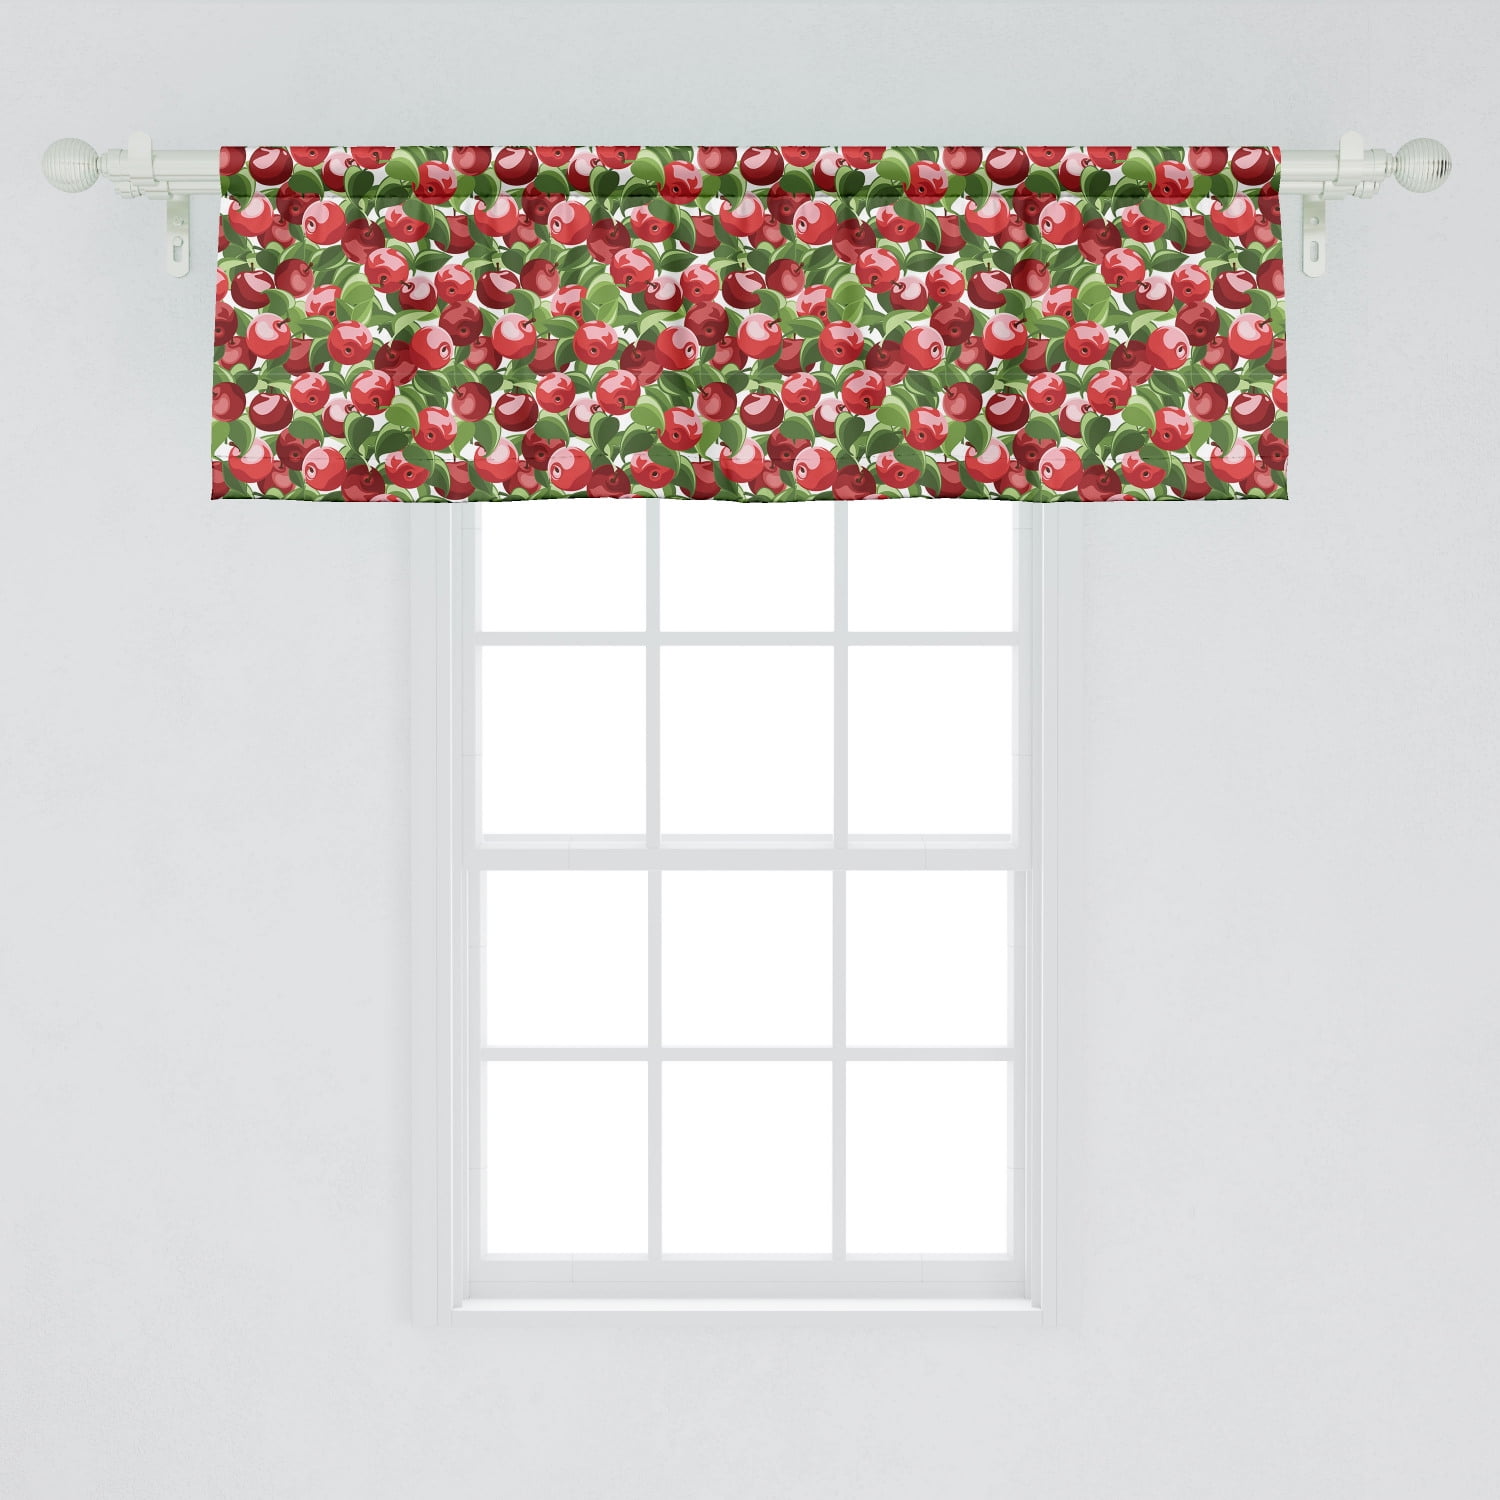 New red APPLES green leaves window VALANCE 